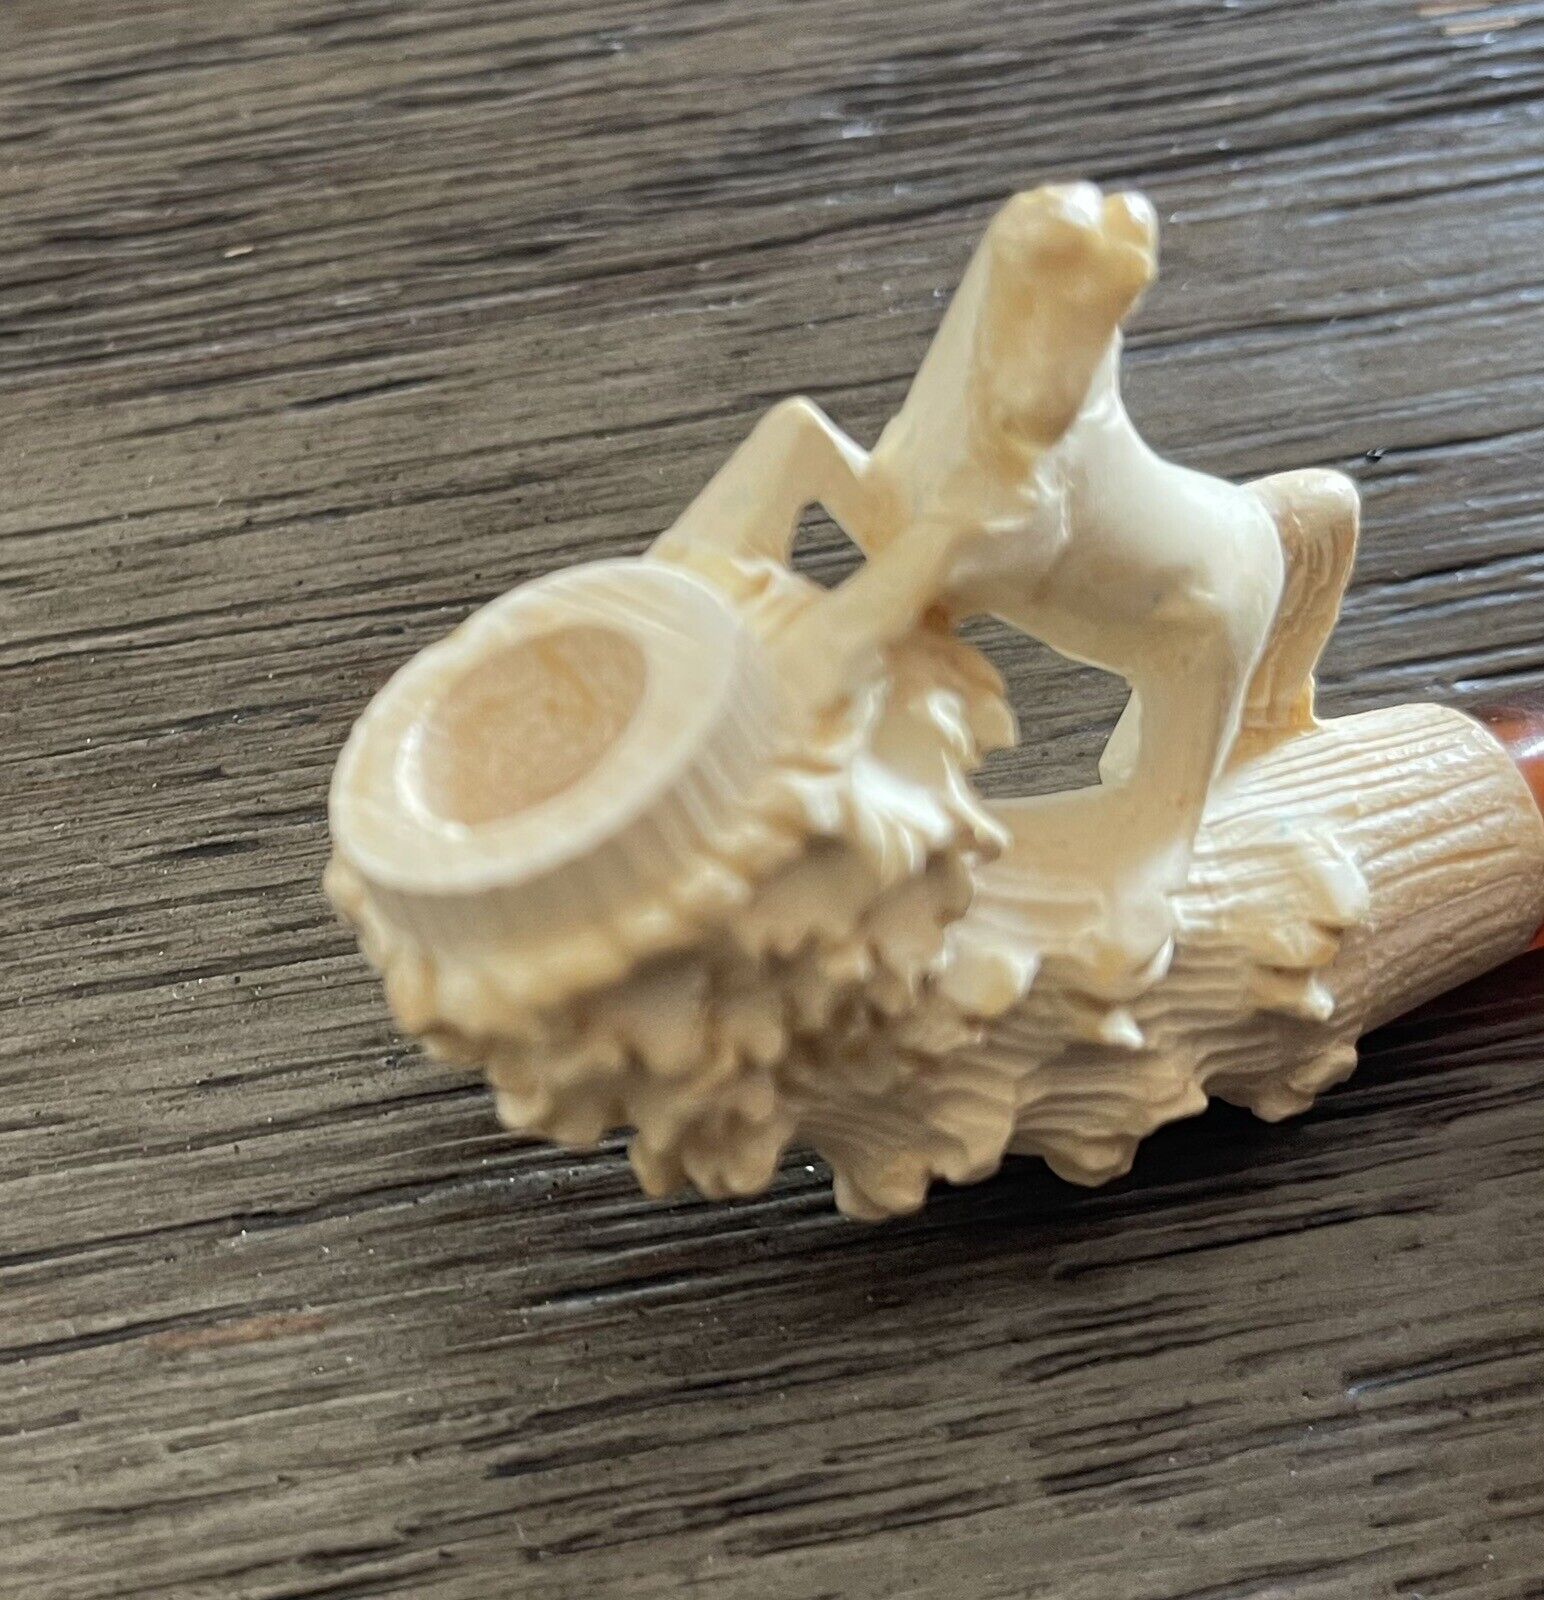 New, Never Used, Meerschaum Horse Pipe with Amber Stem